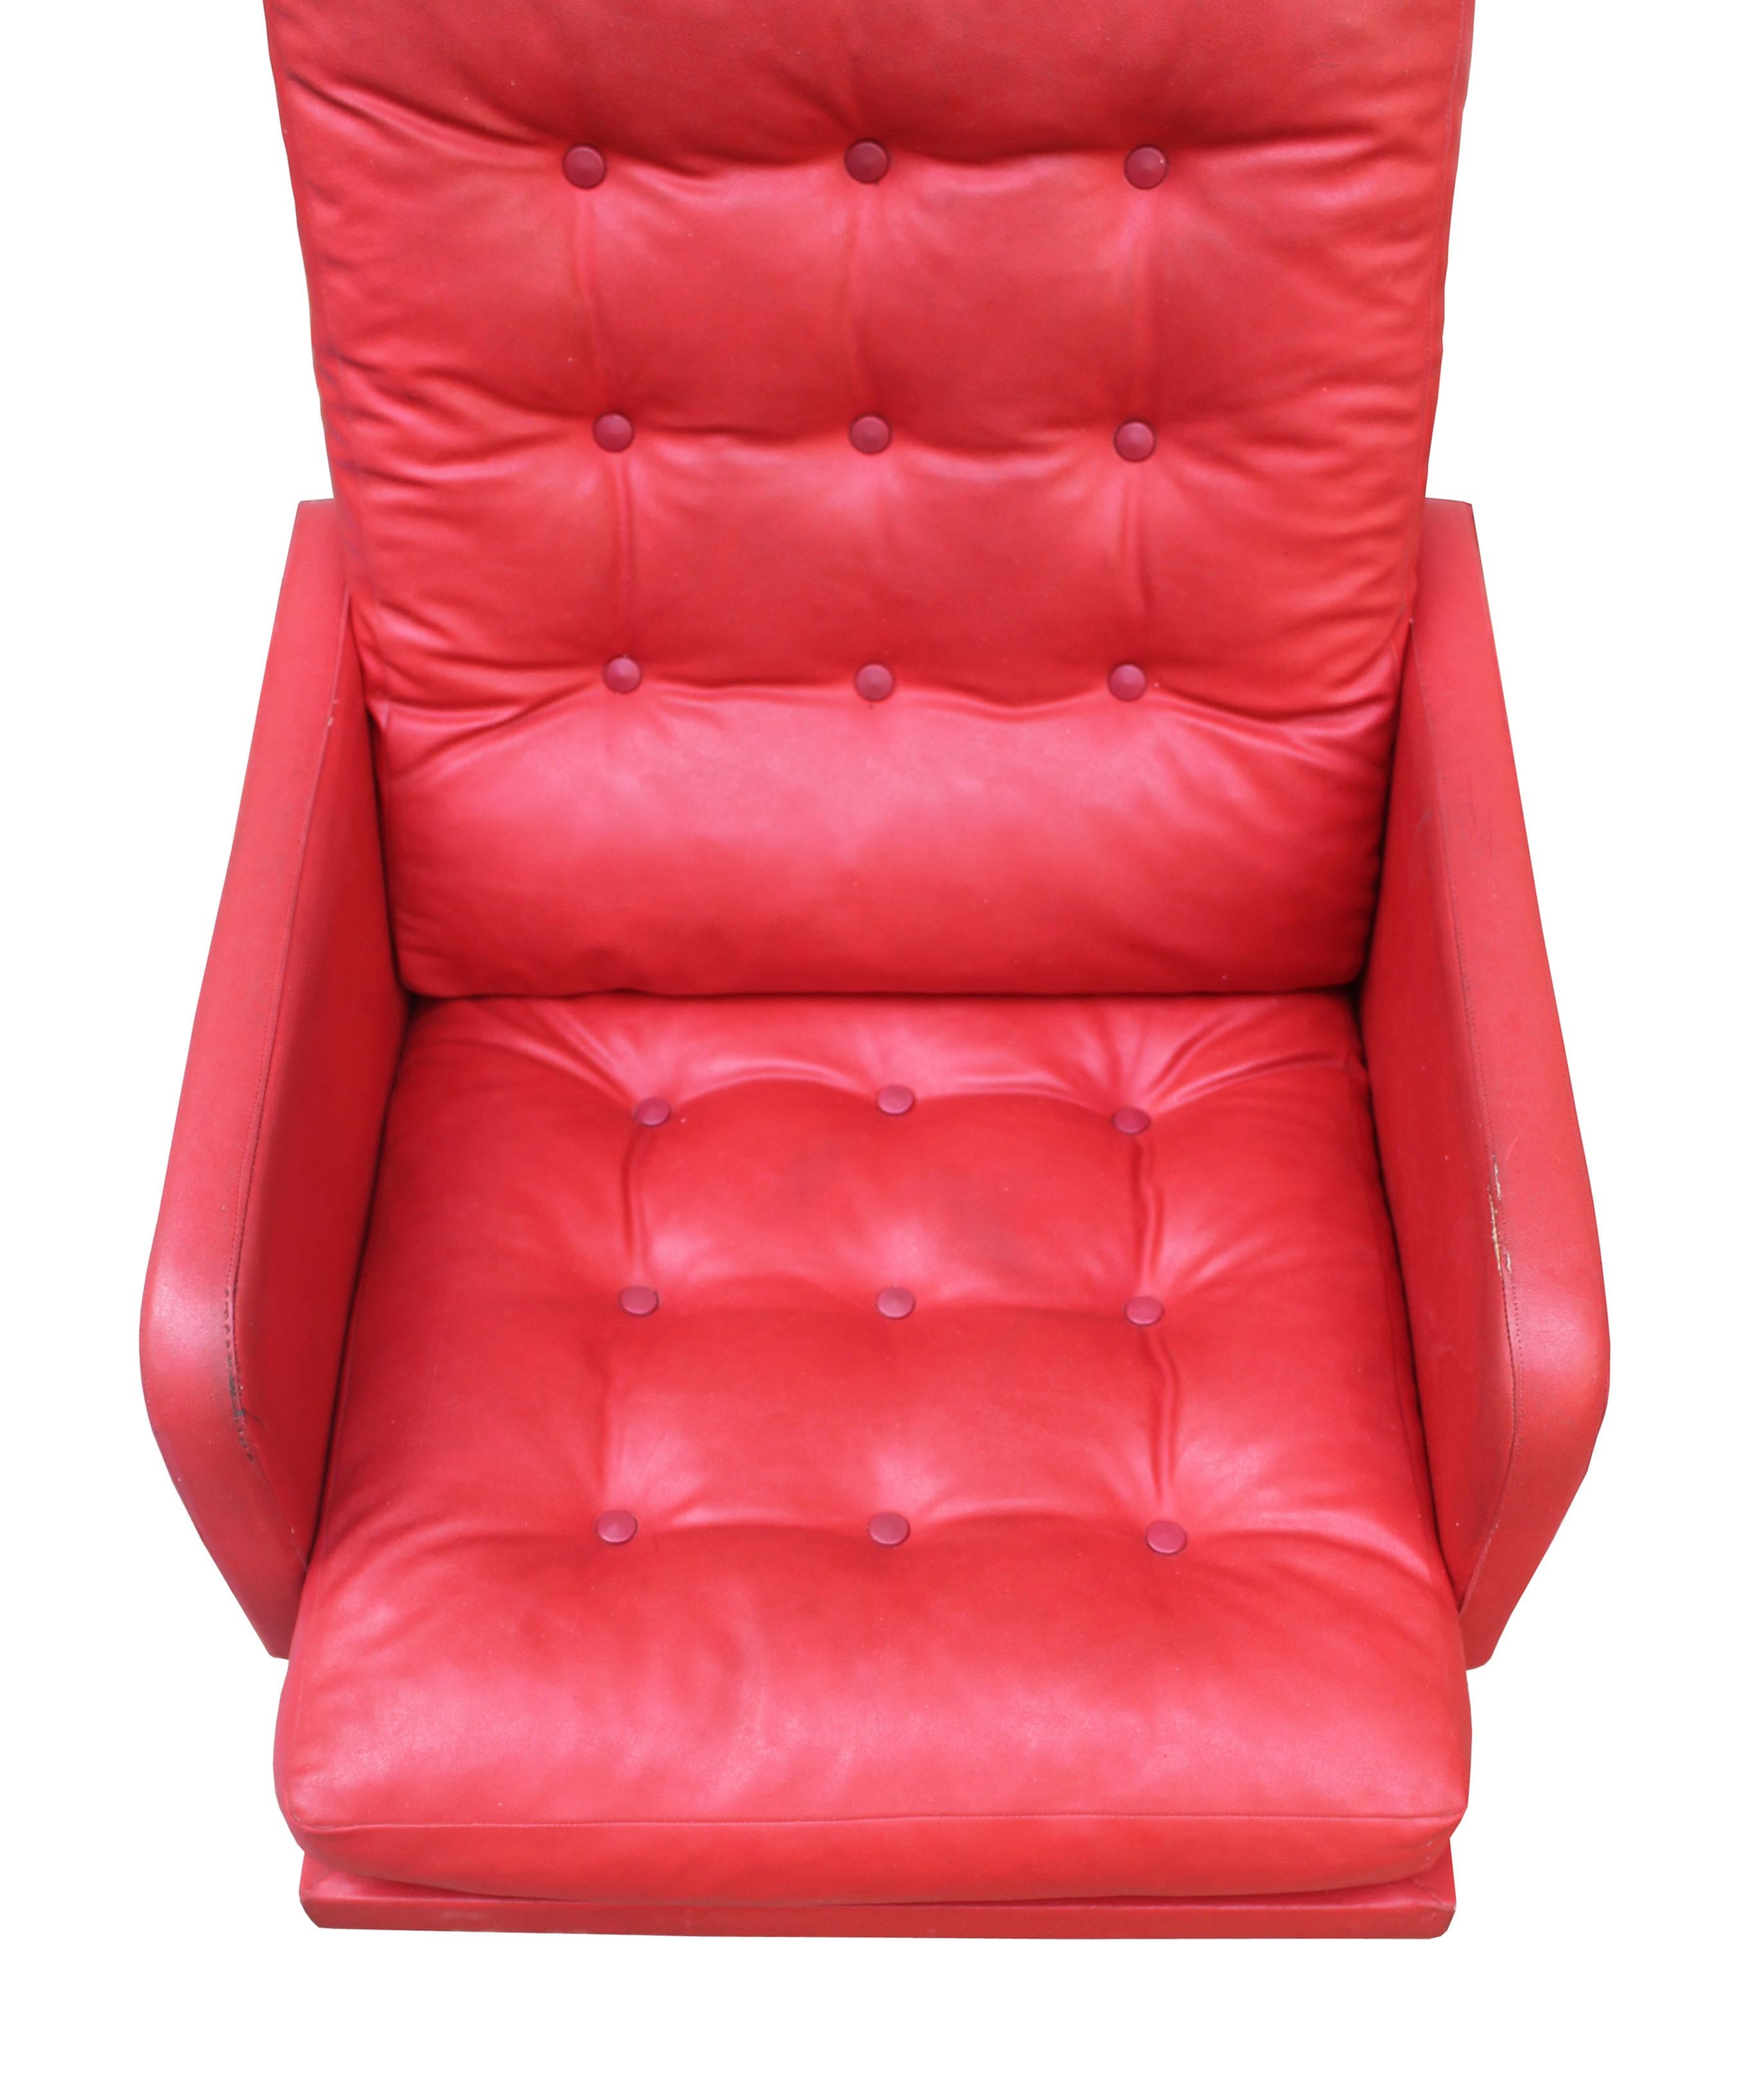 1970s Red Leather Swivel Armchair For Sale 4